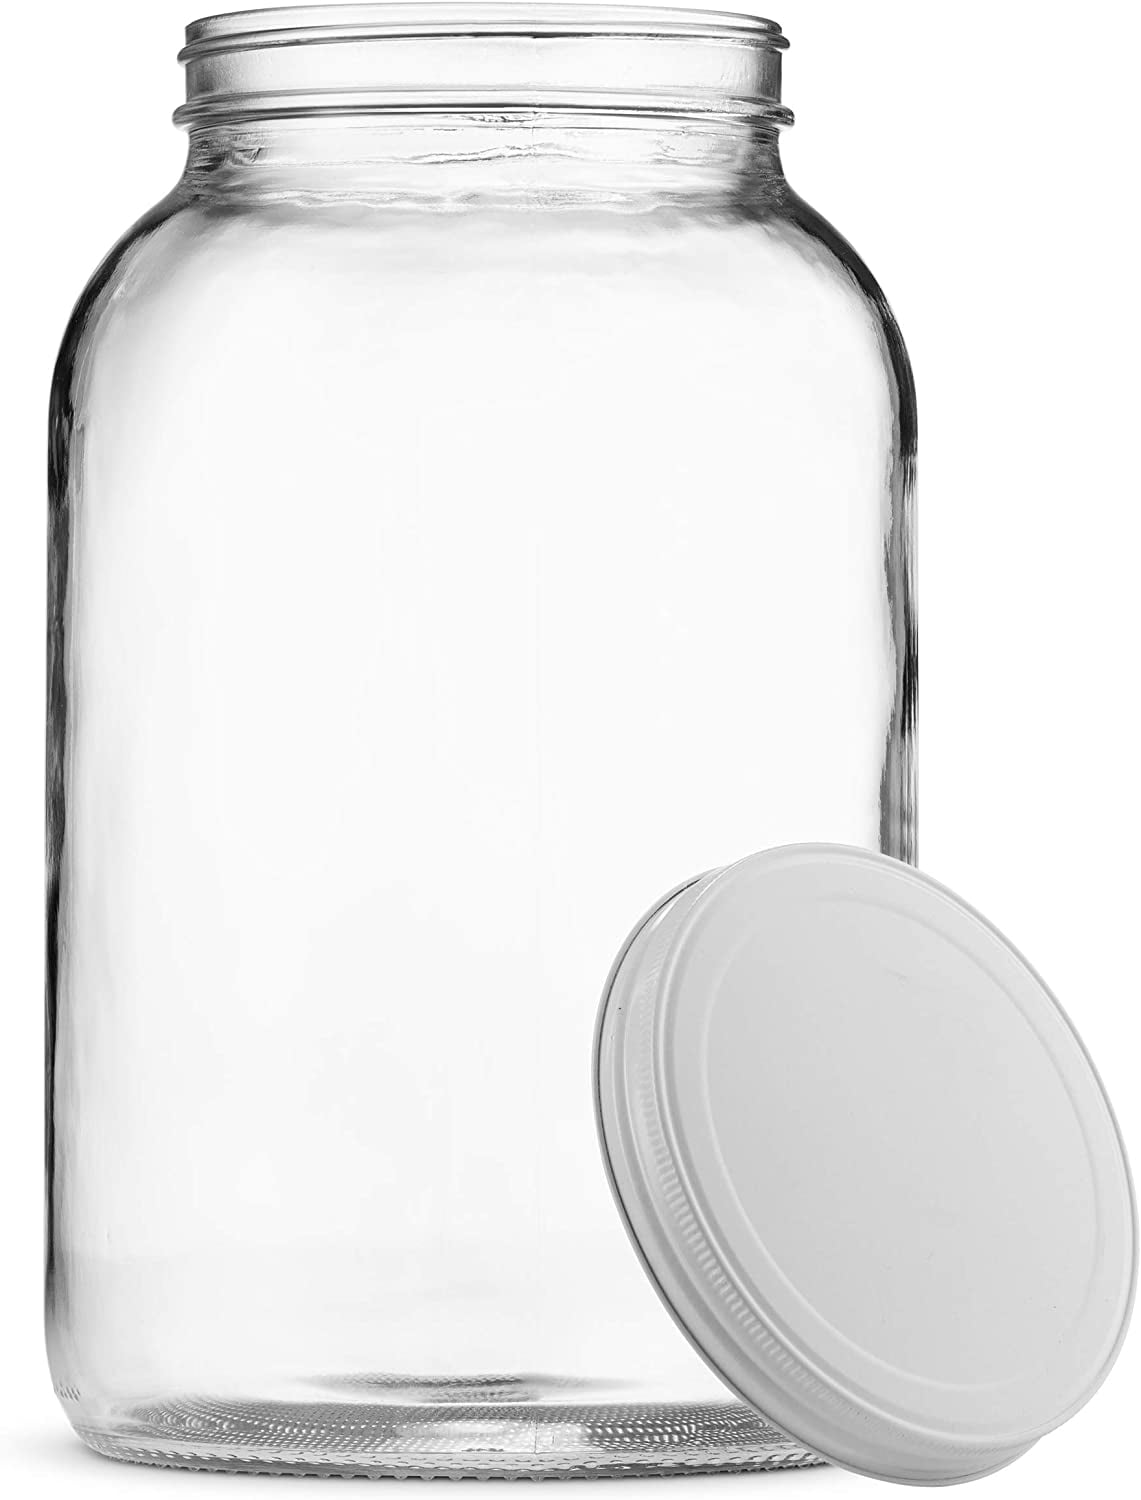 OSQI 1 Gallon Glass Jar with Lid - Set of 2, Extra Large Wide Mouth Mason  Jars for Canning, Flour, Sugar, Rice, Pickled Eggs